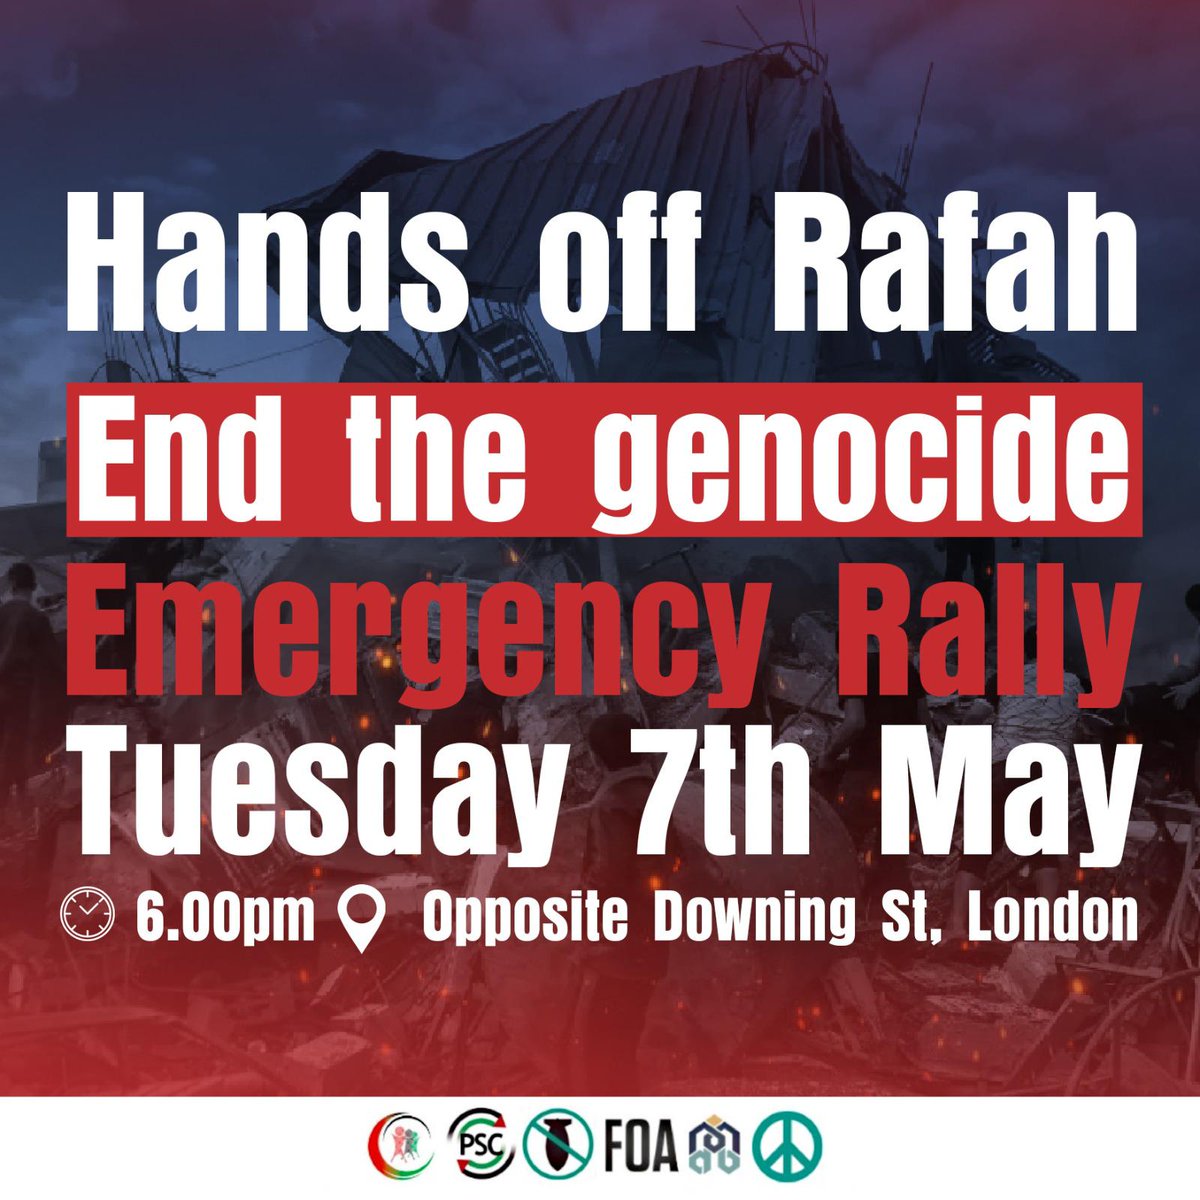 Israel is preparing an invasion of Rafah knowing there is nowhere safe for Palestinians to go. Israel is preparing to unleash further mass slaughter anticipating it will face zero consequences from its key allies in the West. We must act. Emergency Rally tomorrow. 6 PM.